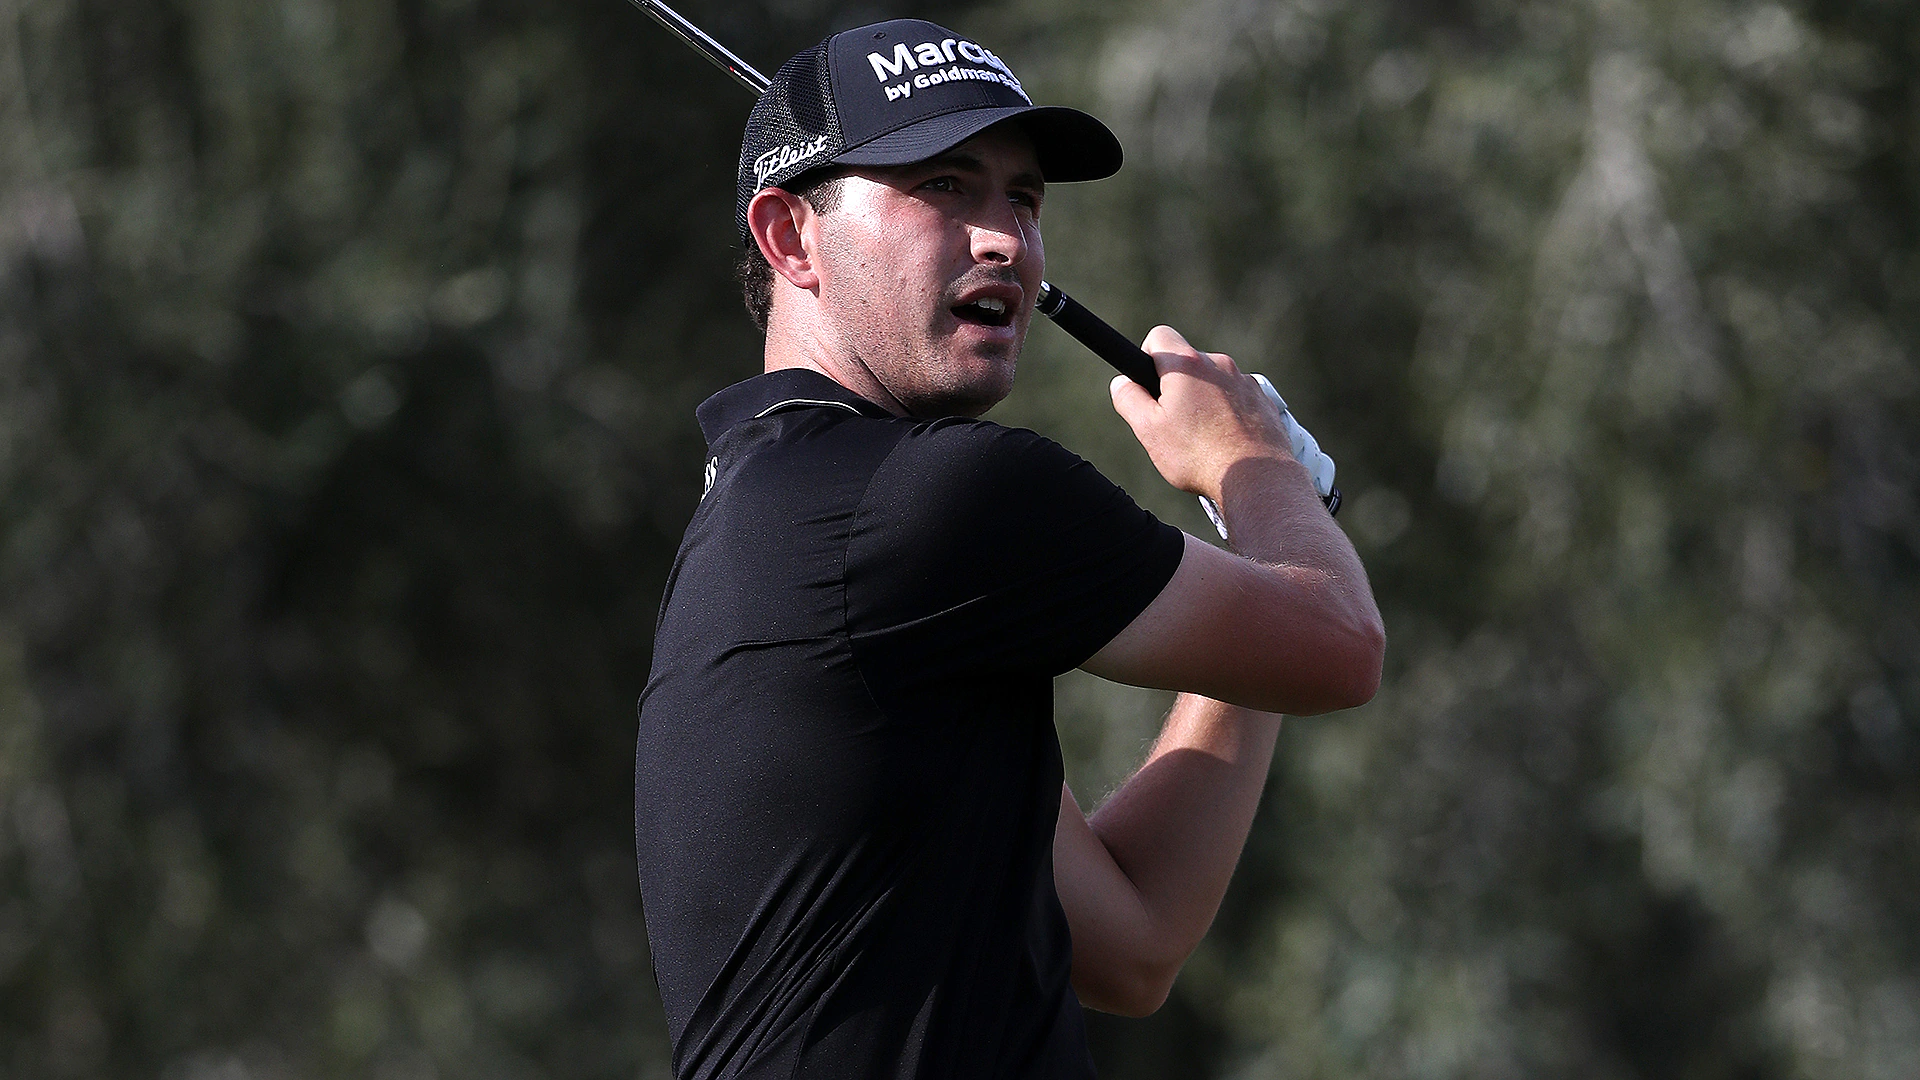 Former champ Patrick Cantlay (63) continues success at TPC Summerlin